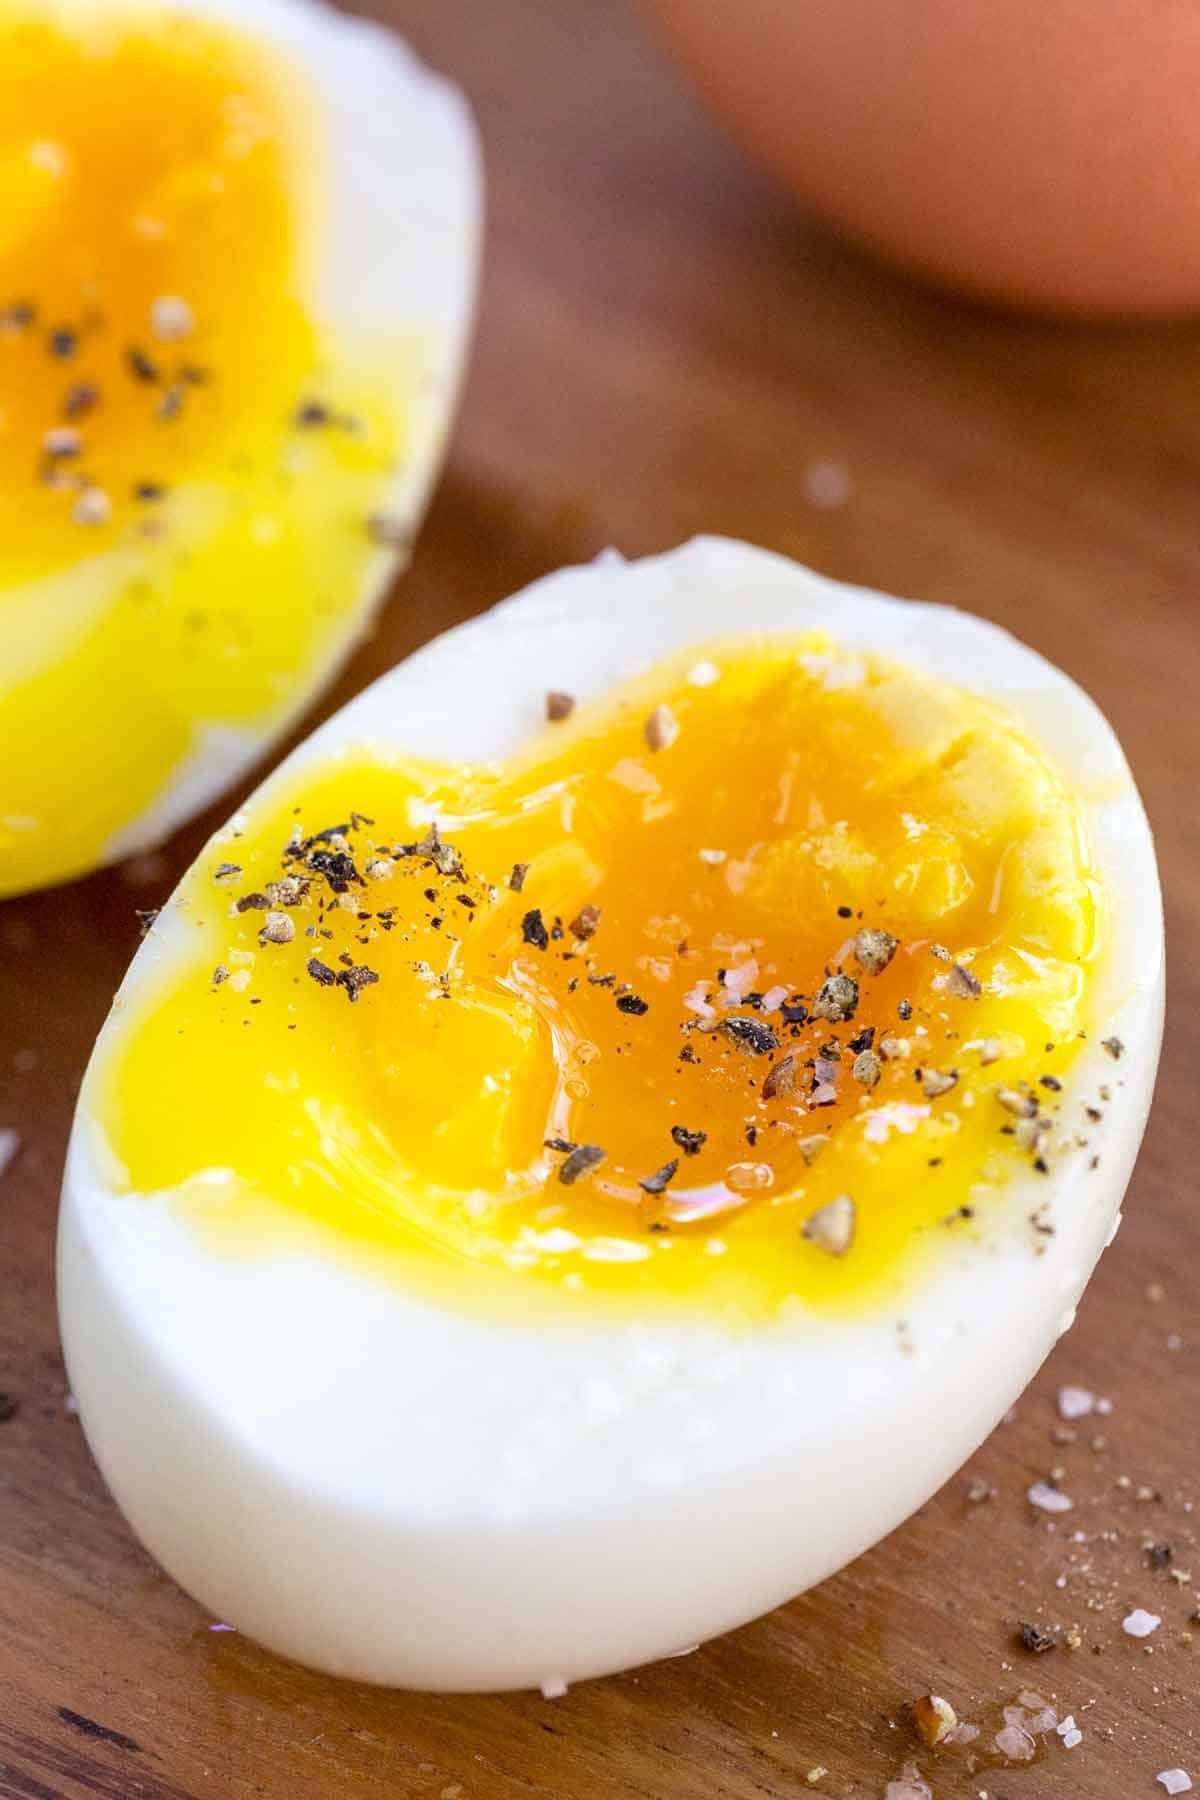 Instant Pot Eggs: Soft and Hard Boiled